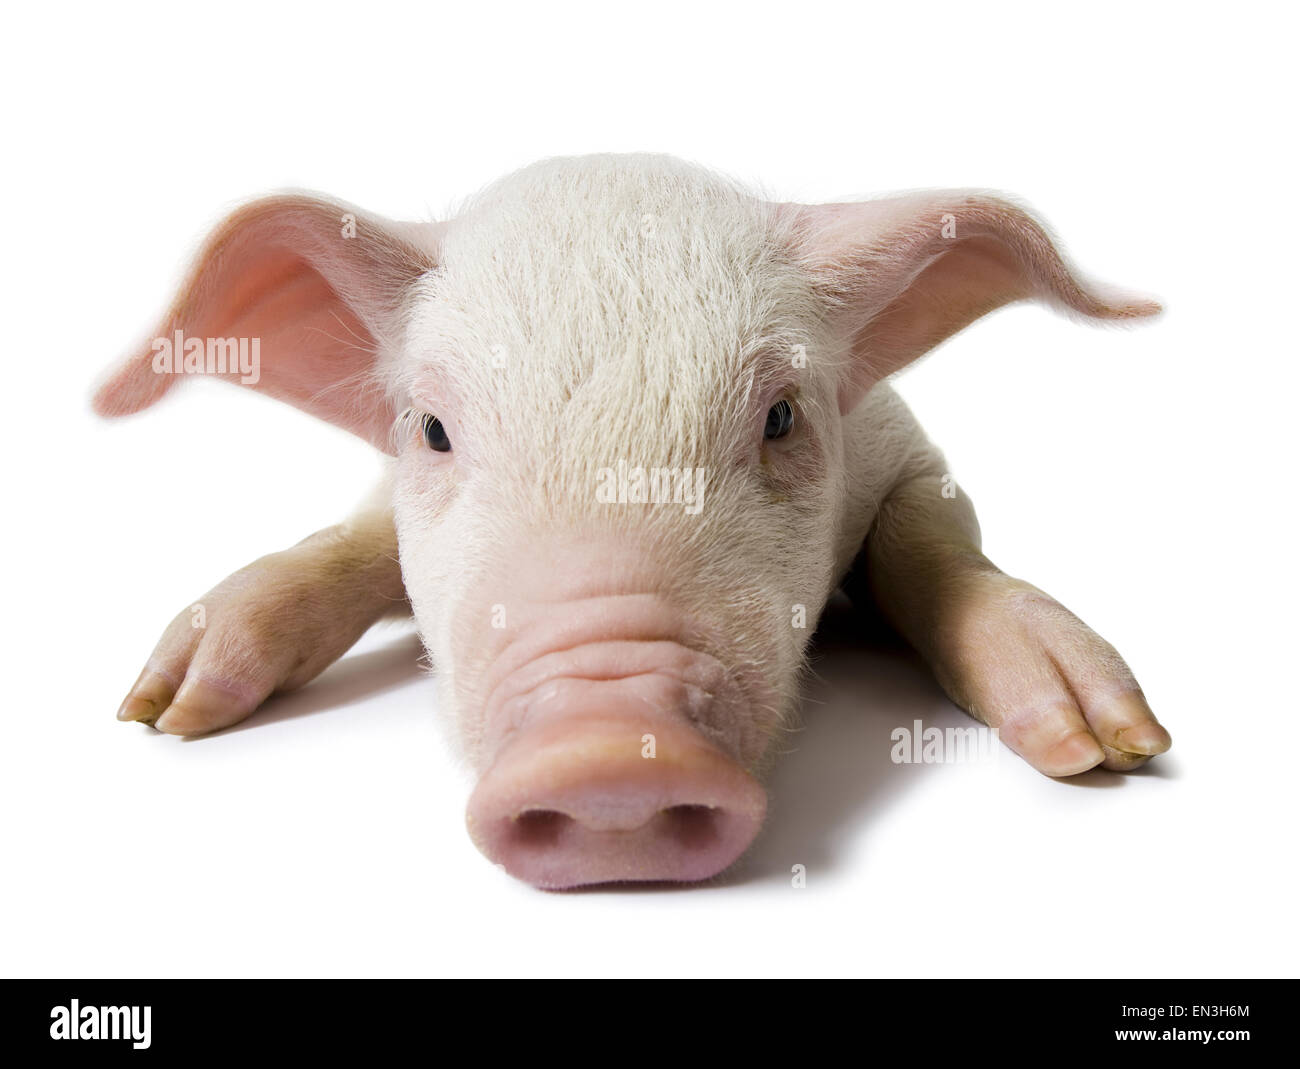 Pig face and snout close up Stock Photo